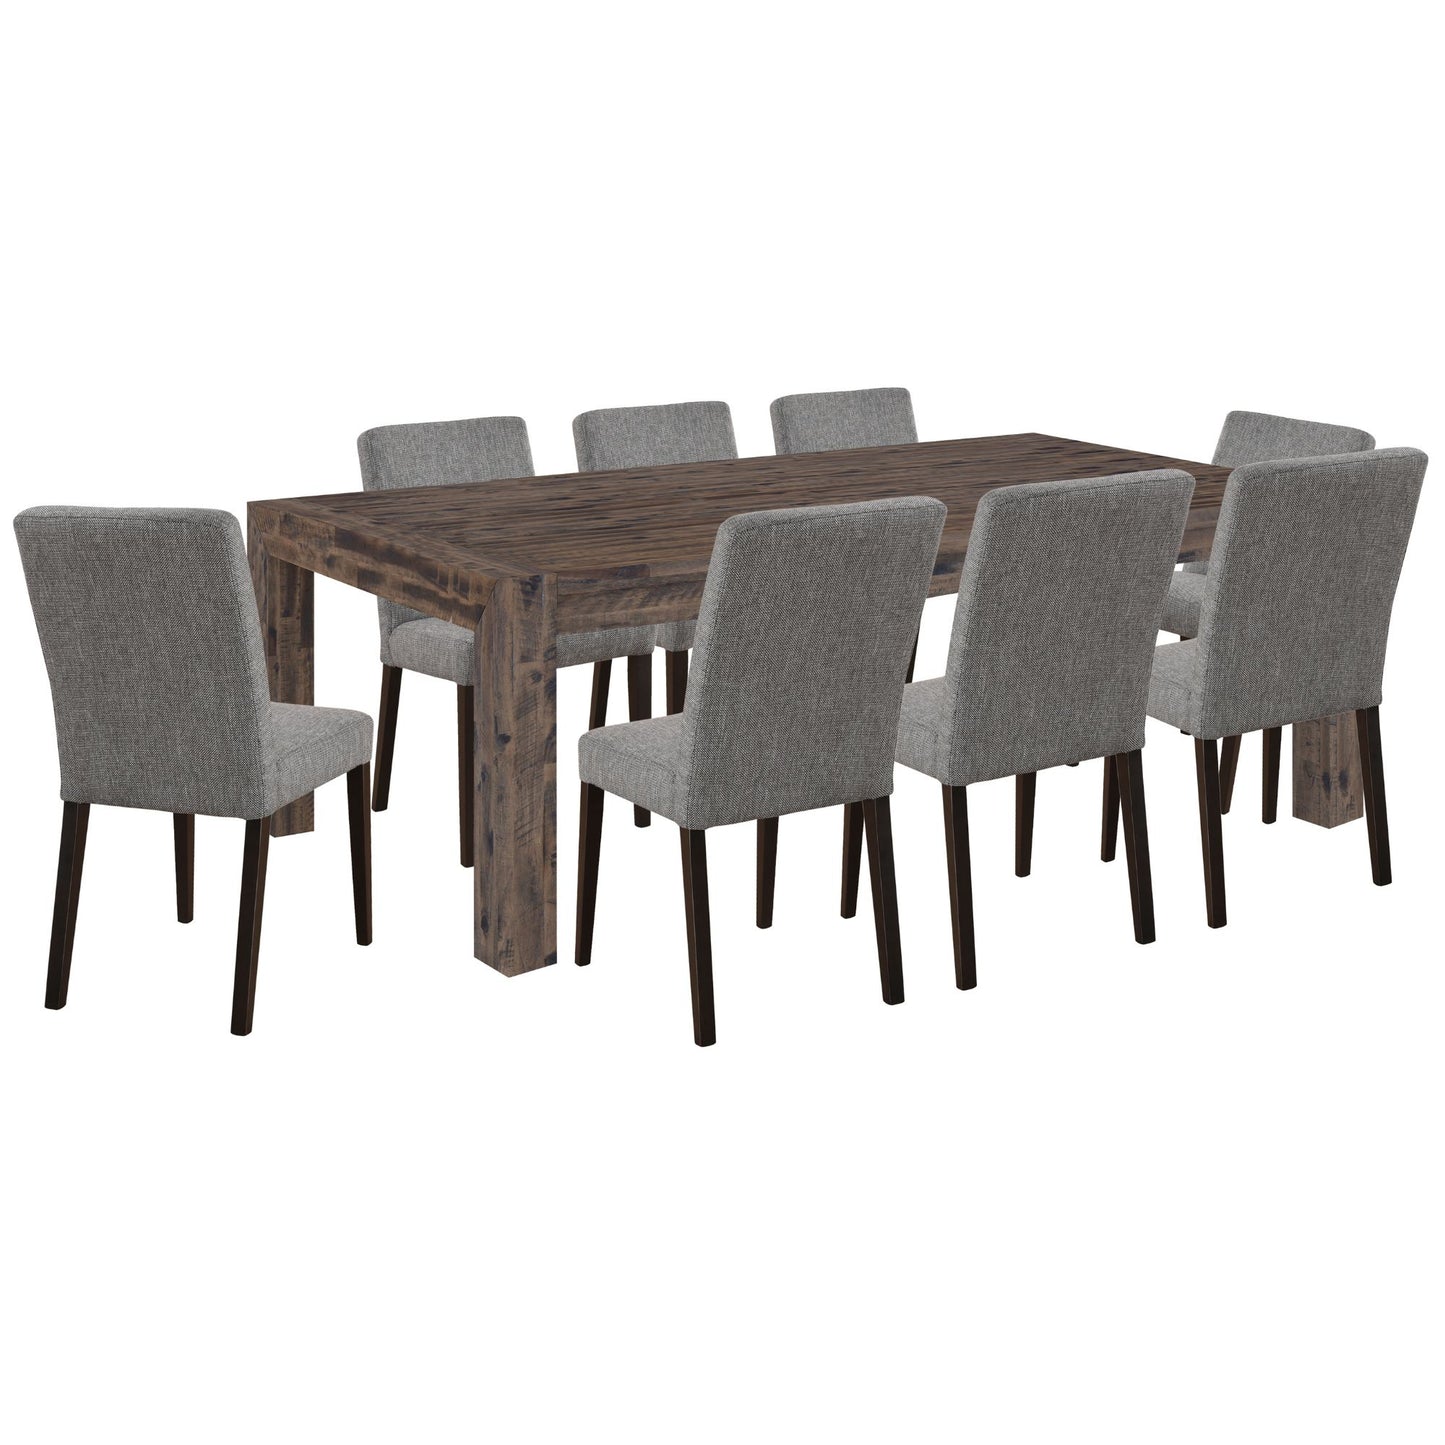 Catmint 9pc Solid Wood Dining Set 210cm